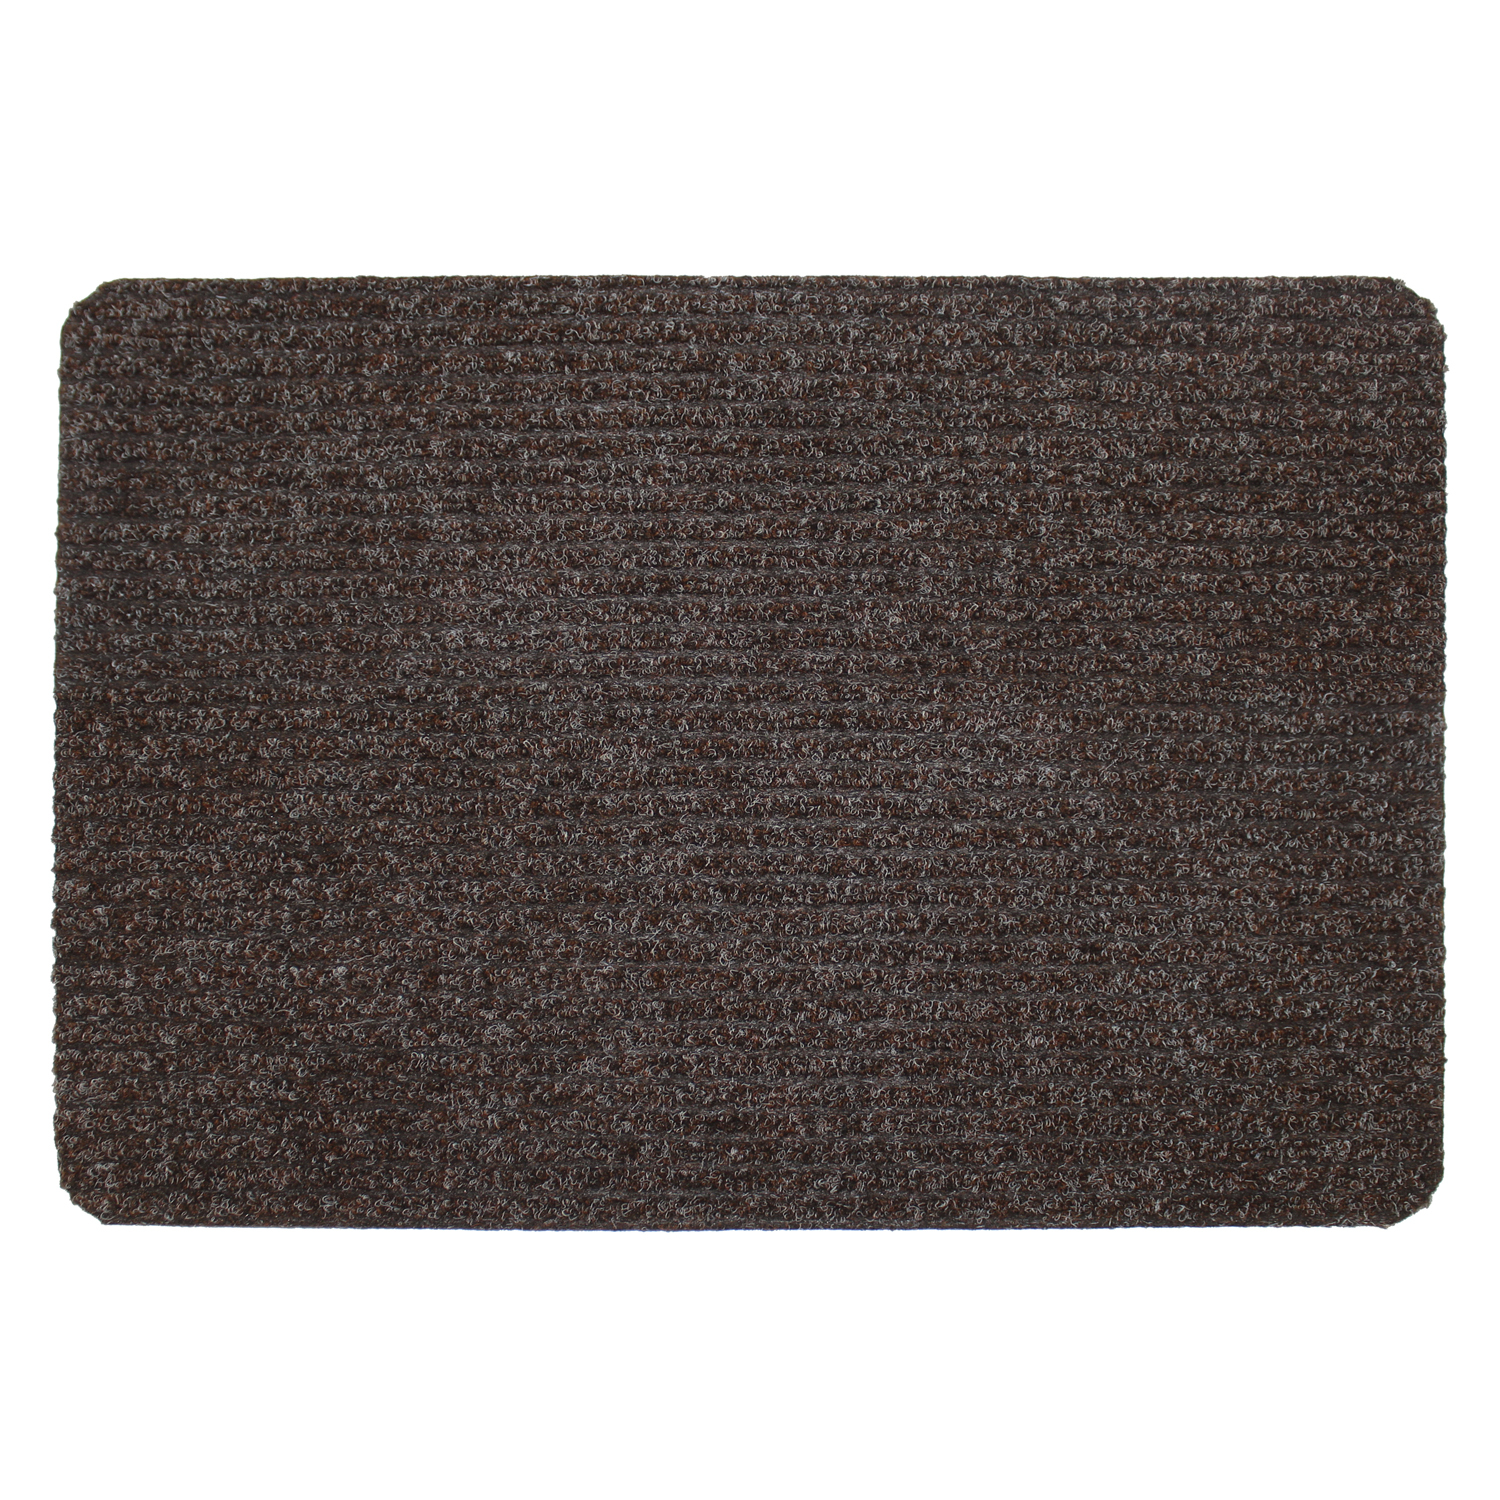 Single My Home Juno Large Ribbed Doormat 80 x 50cm in Assorted styles Image 1